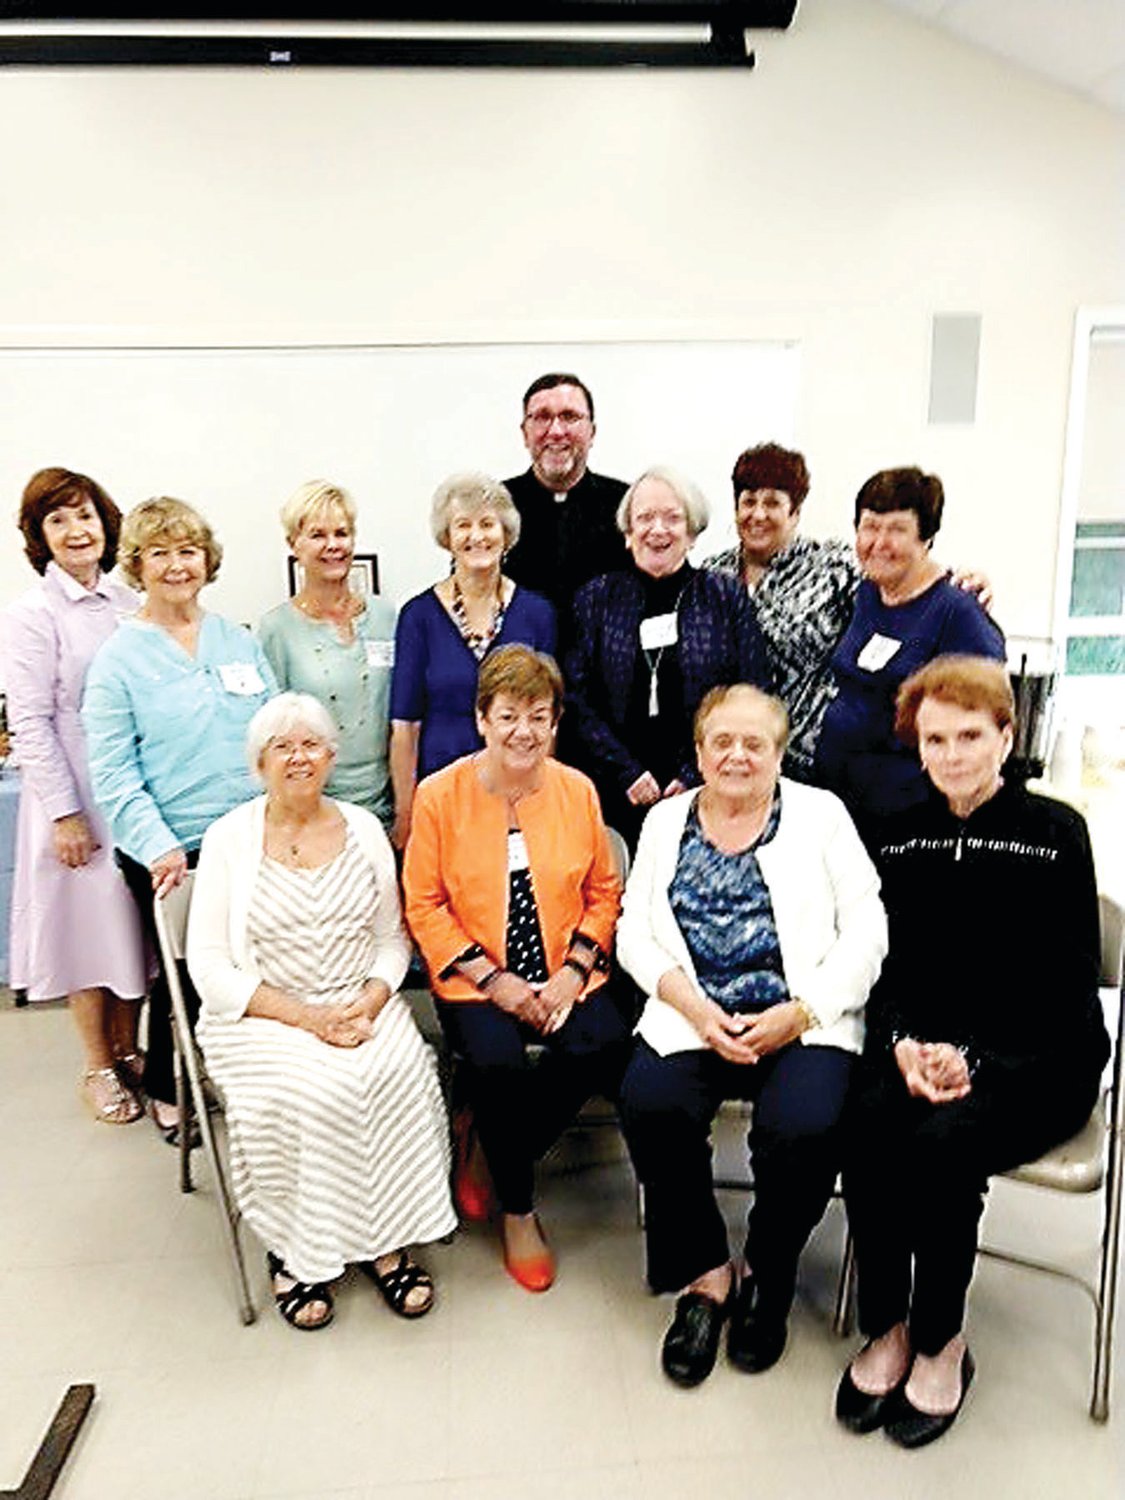 From left, top row, are: Mary Ellen Stanton; Berni Padva, co-chair; Mary Jane Murnane; Yvonne Lorenz; the Rev. Christopher Walsh; Pat Hackett; Deb Nerviano, co-chair; and Pamela Good; and bottom row, Sue Benzie, Maureen Casey, Barb Petrone, and Mary Lou Gehring.